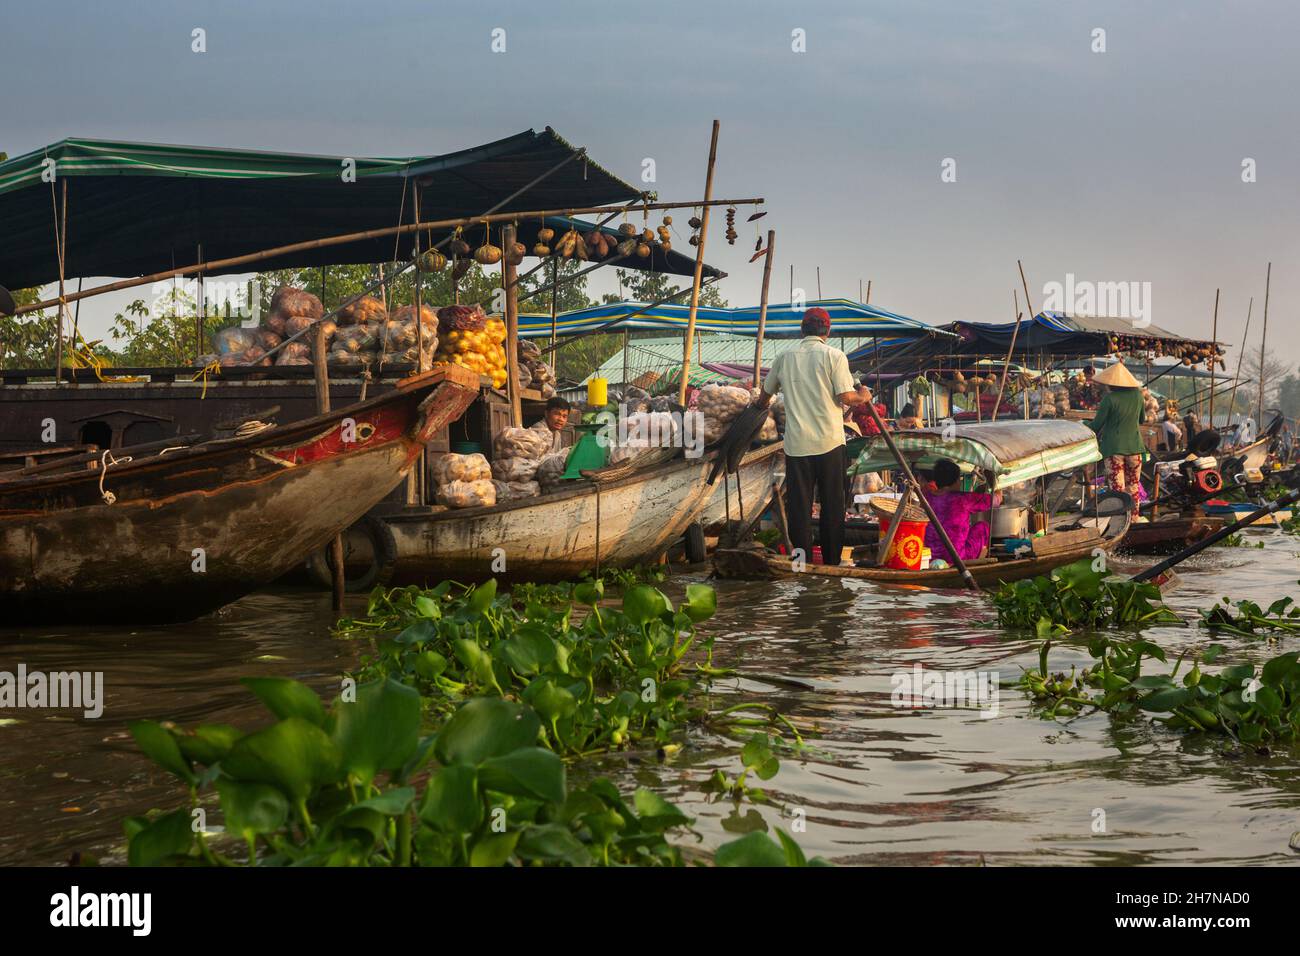 Soc Trang, Vietnam - April 5, 2018: People buying and selling agricultural products in a floating market on Mekong Riiver. Stock Photo